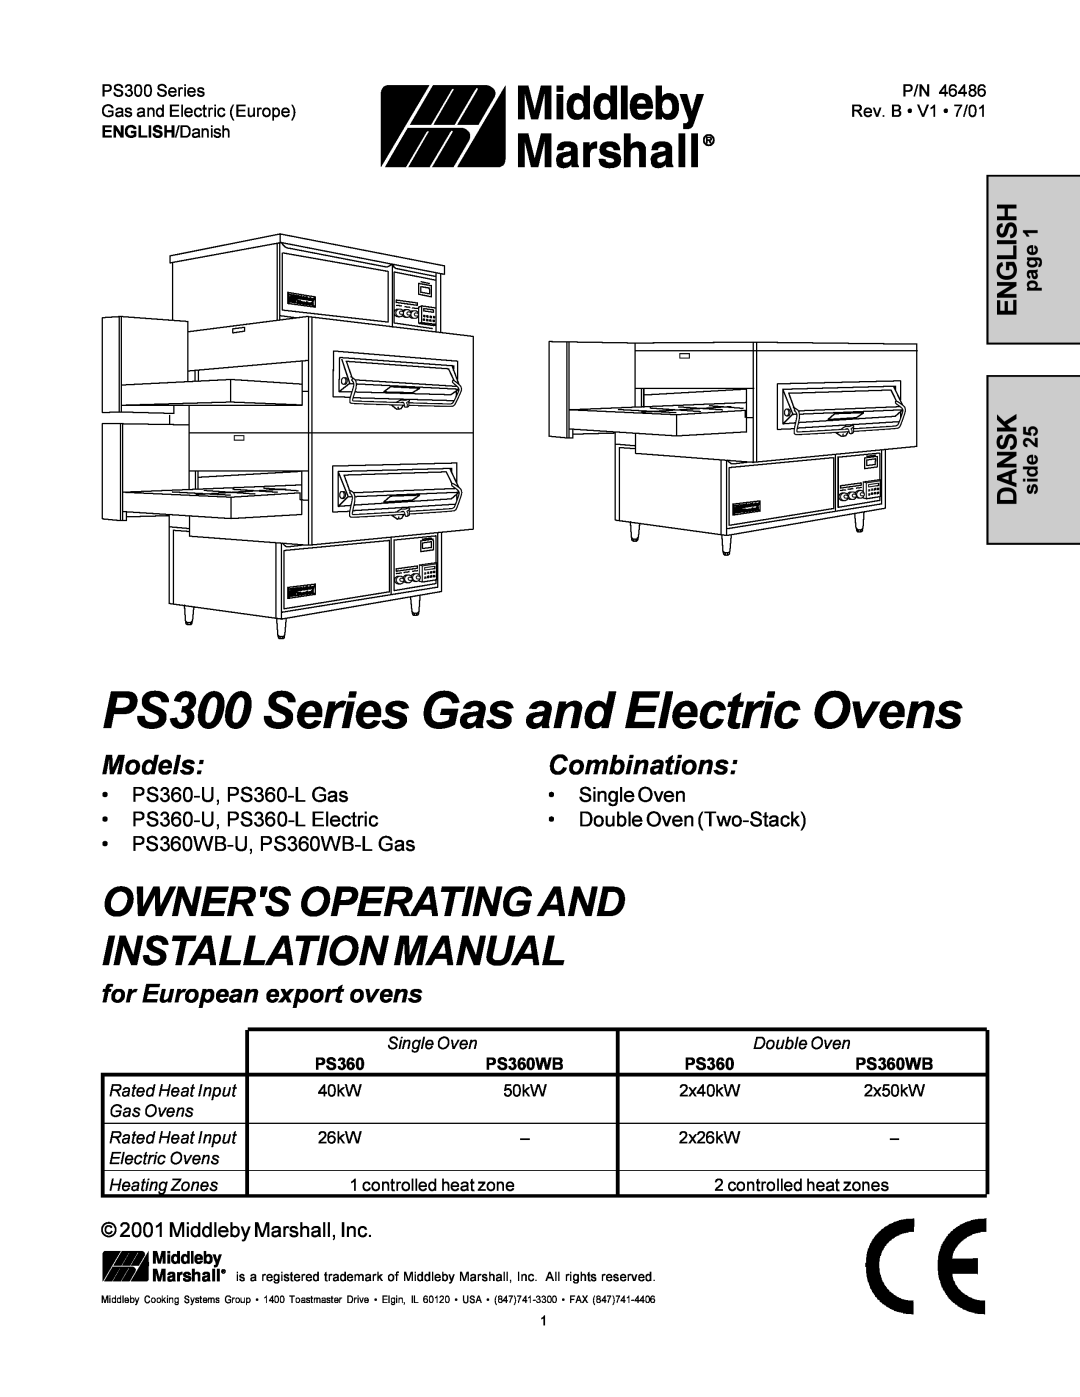 Middleby Marshall PS360-U installation manual Models Combinations, PS300 Series Gas and Electric Ovens, Single Oven 